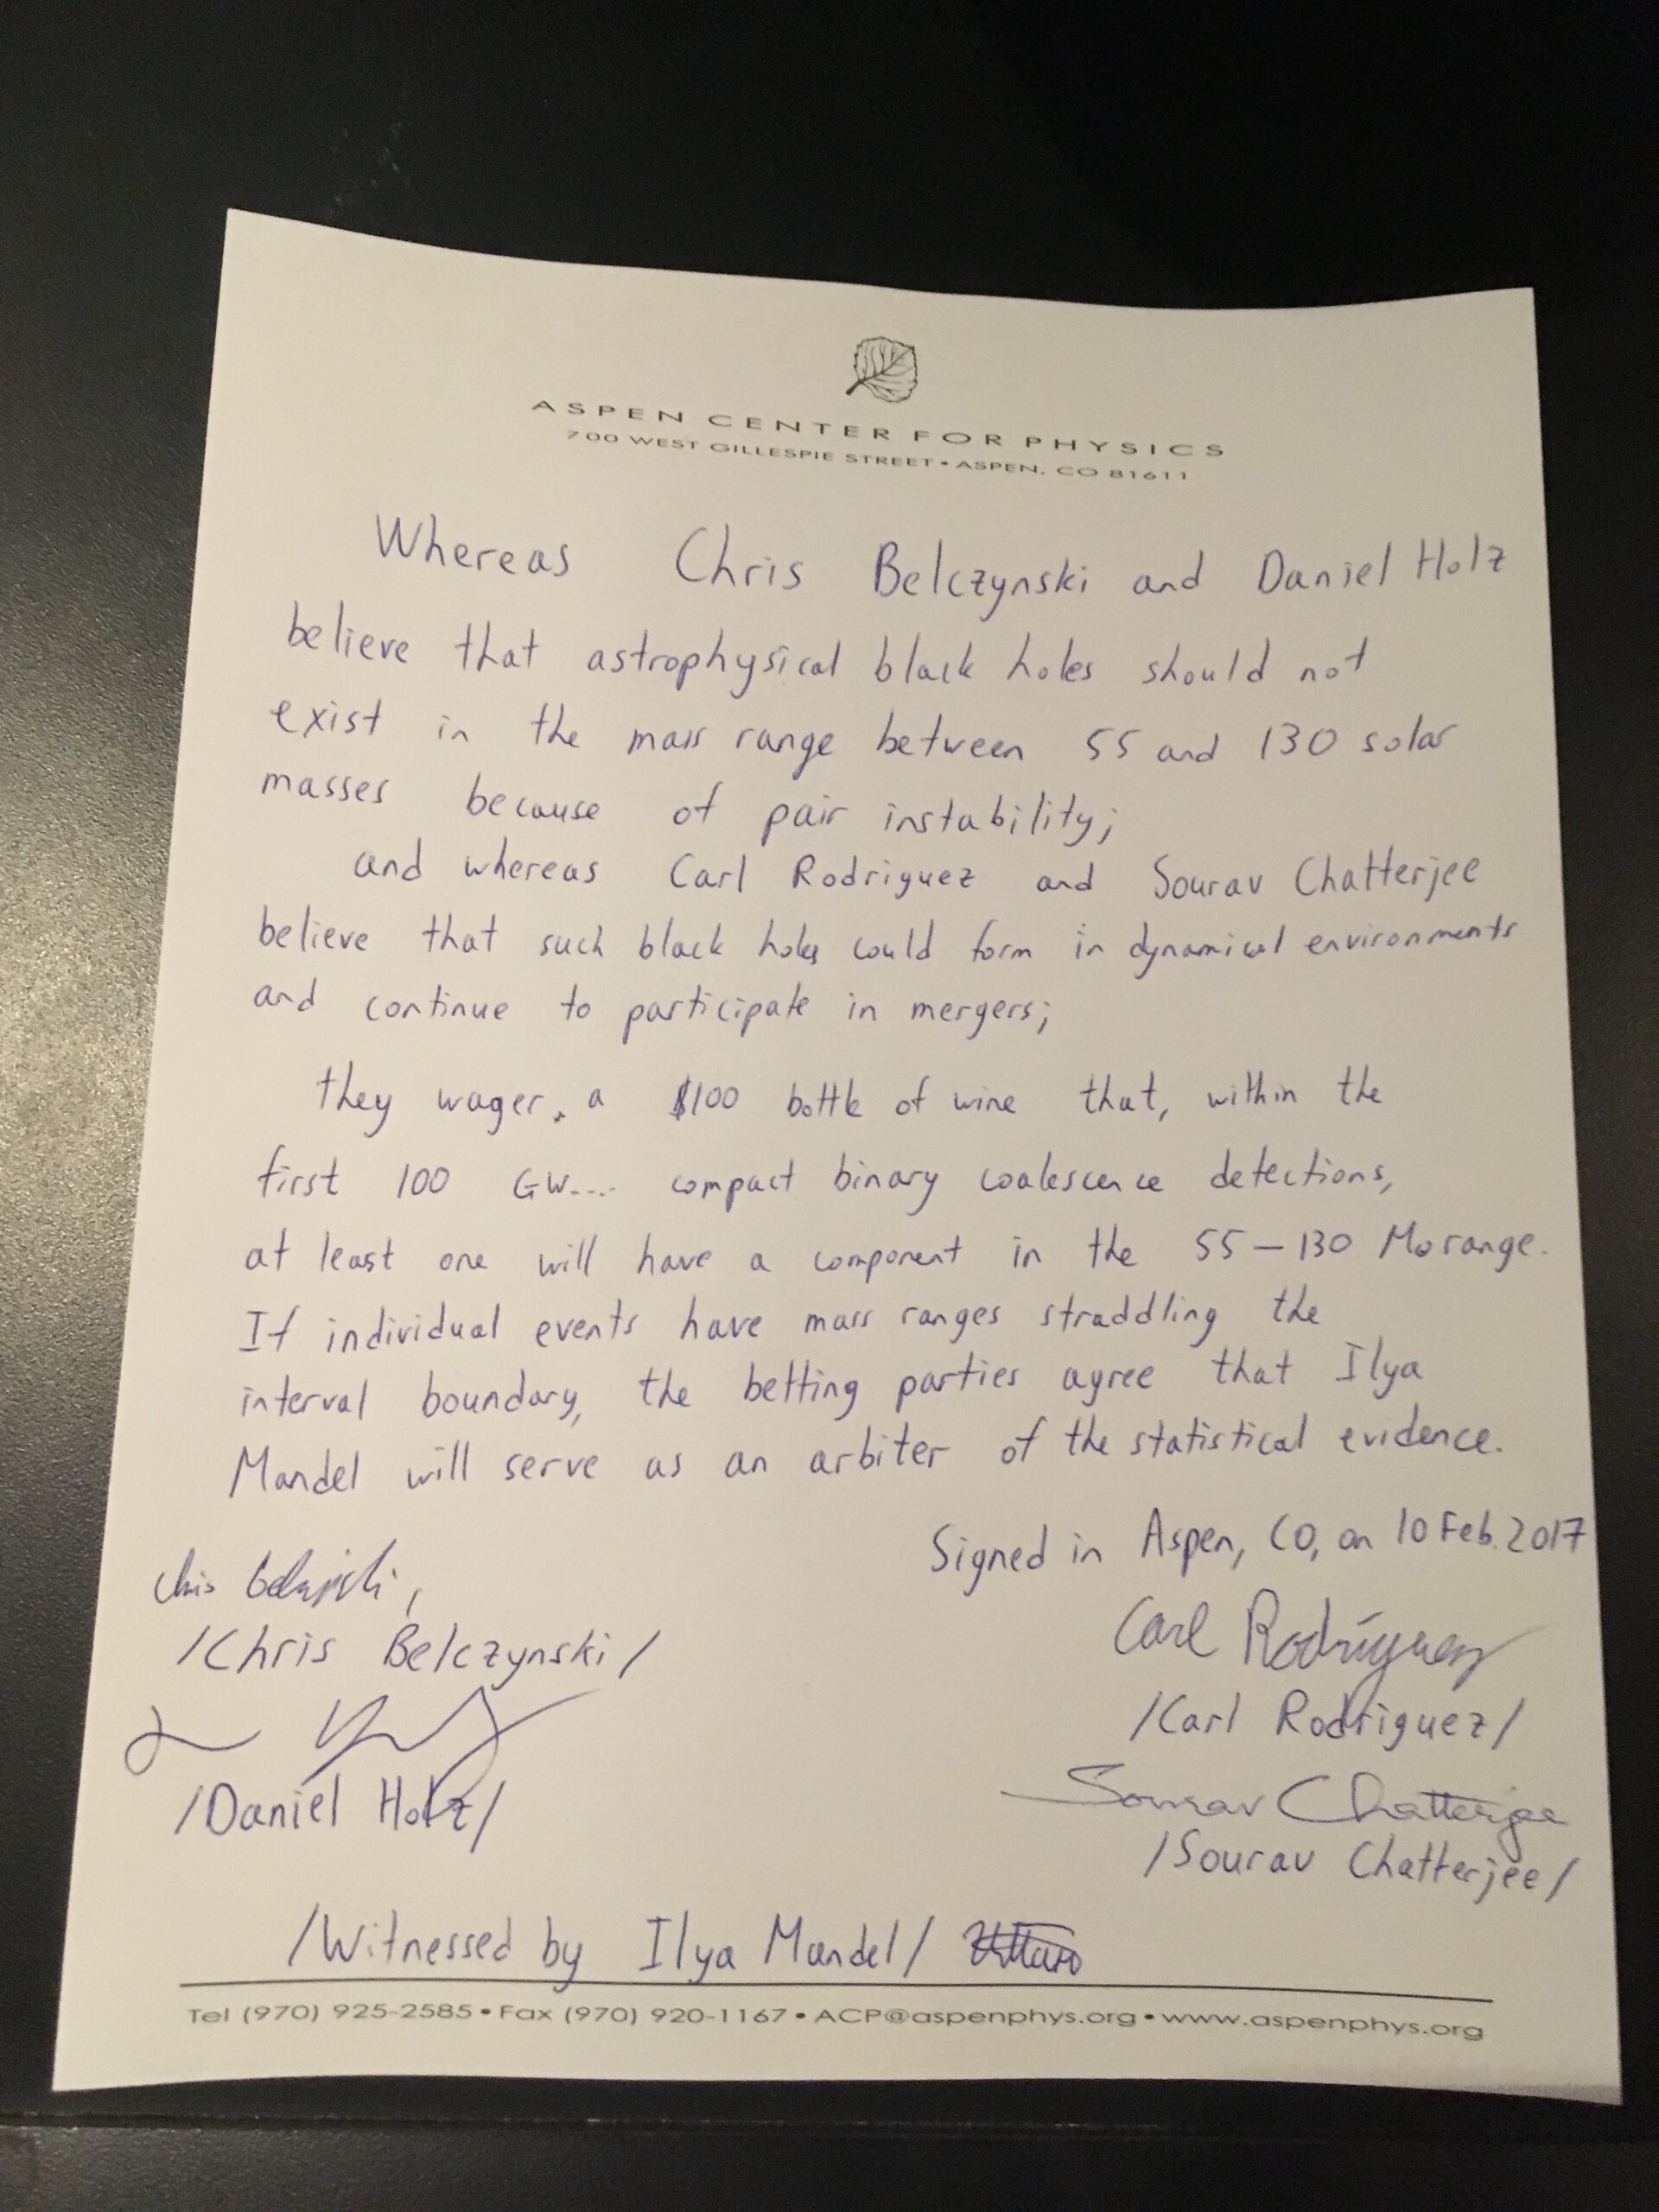 Handwritten bet between Chris Belczynski/Dan Holz and Carl Rodriguez/Sourav Chatterjee, wagering a $100 bottle of wine that within the first 100 gravitational wave detections, one black hole will lie in the 55-130 solar mass range.